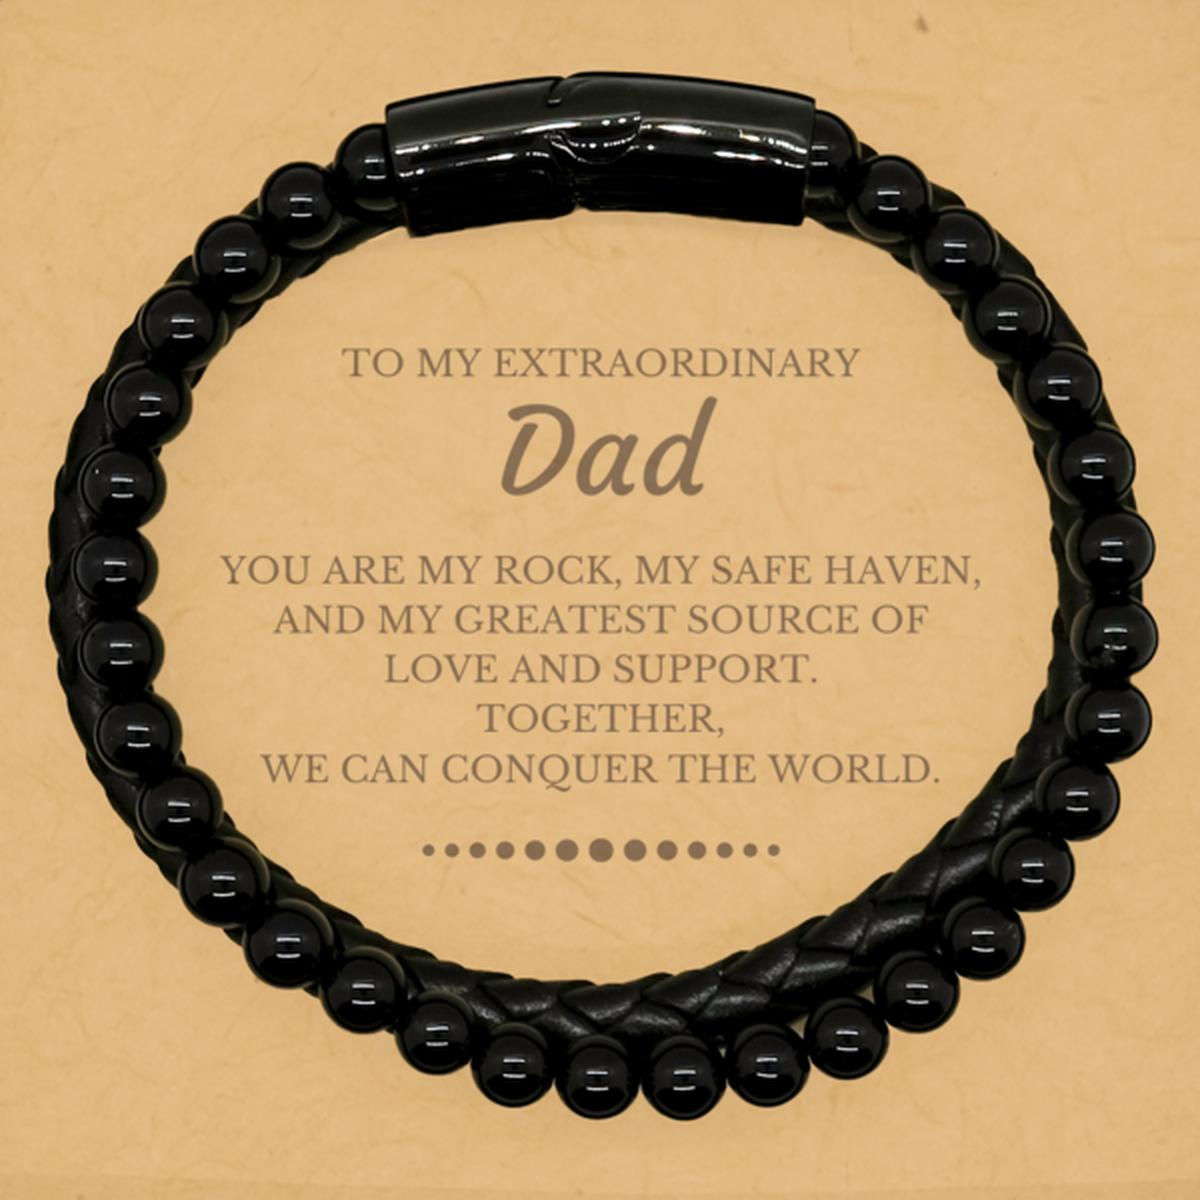 To My Extraordinary Dad Gifts, Together, we can conquer the world, Birthday Stone Leather Bracelets For Dad, Christmas Gifts For Dad